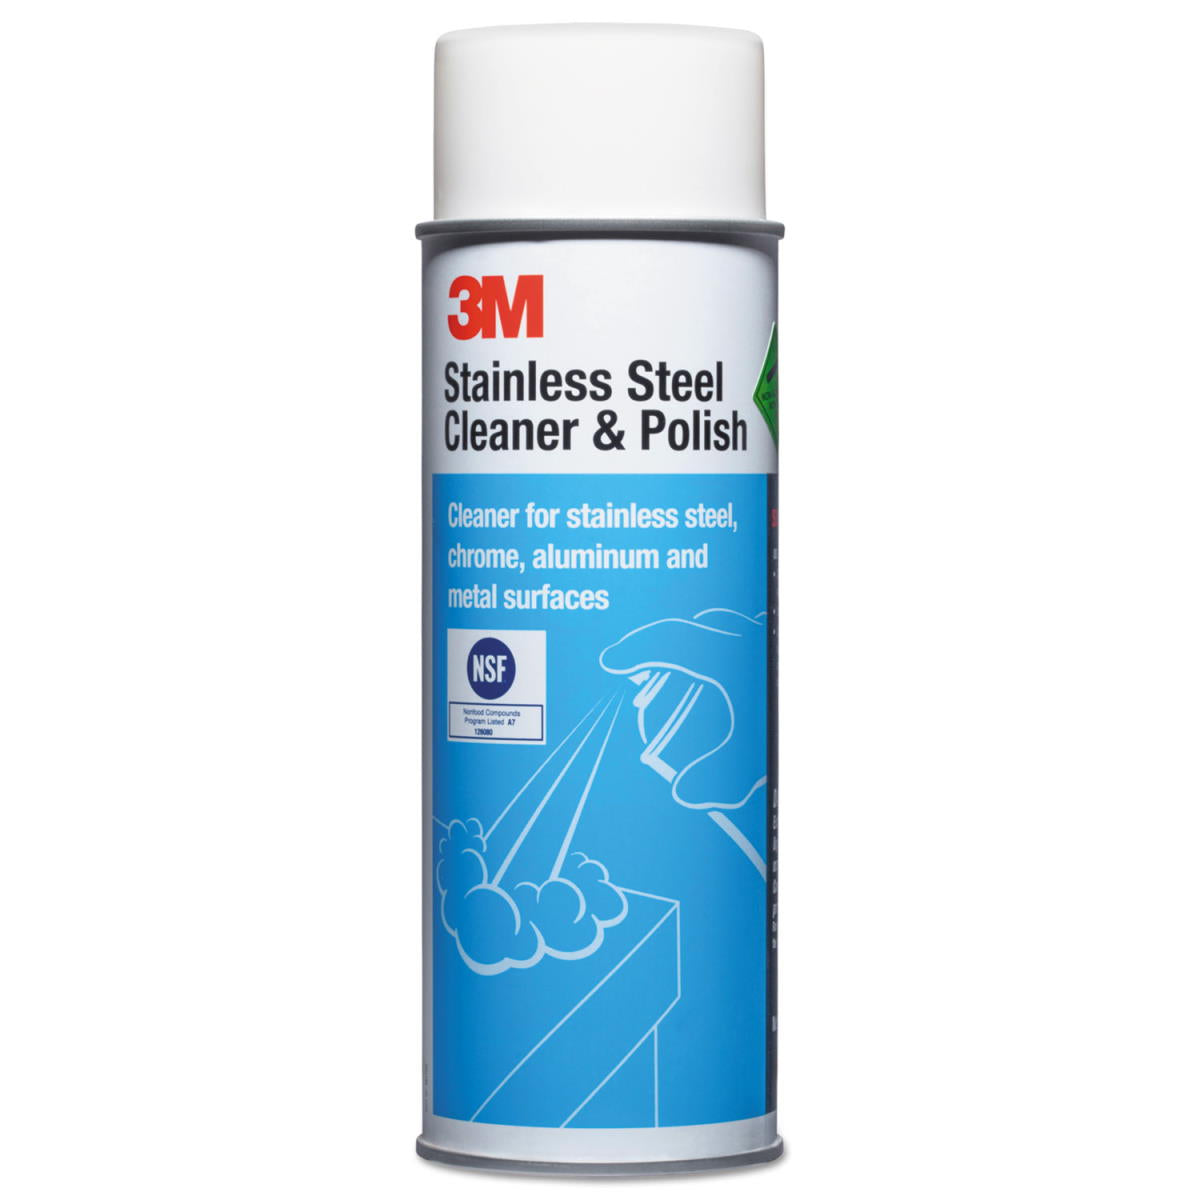 3M™ Stainless Steel Cleaner & Polish (21 oz Aerosol Cans) - Case